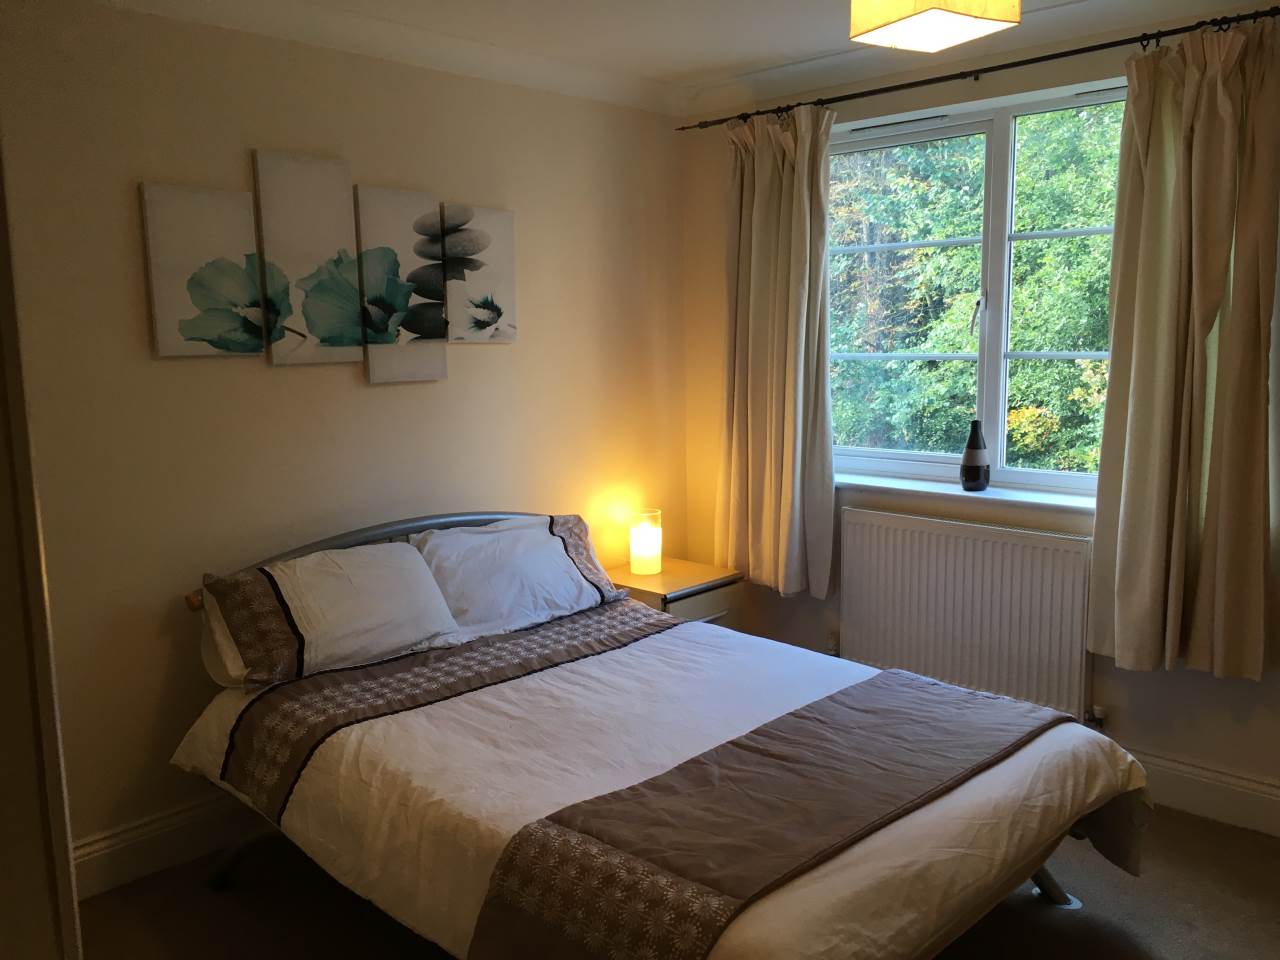 1 bed  to rent, Sutton Coldfield - Property Image 1